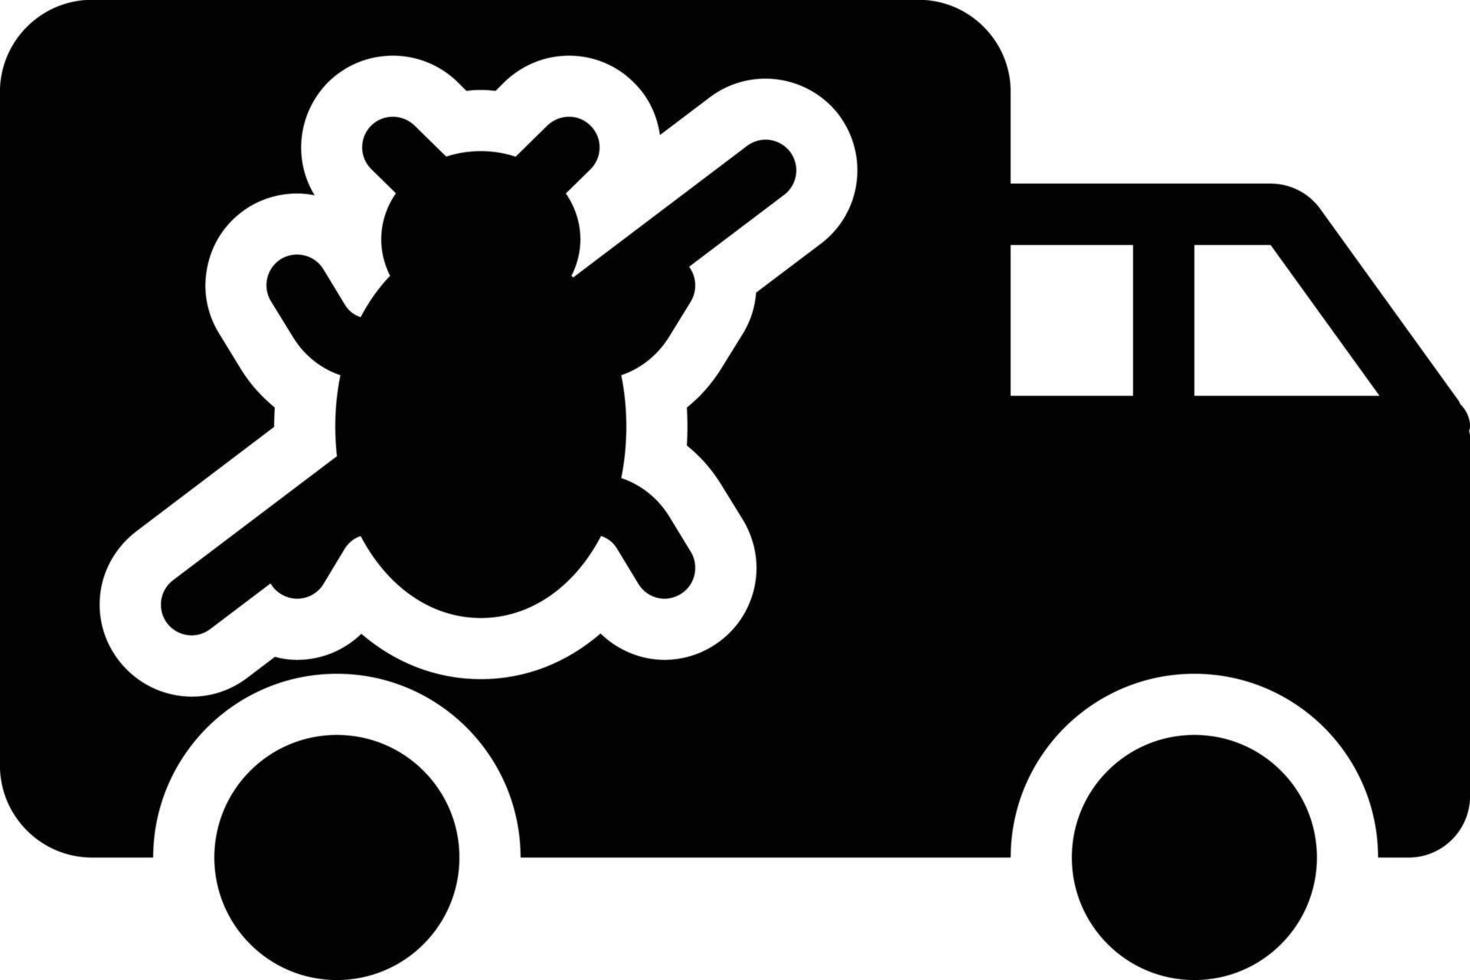 truck vector illustration on a background.Premium quality symbols.vector icons for concept and graphic design.